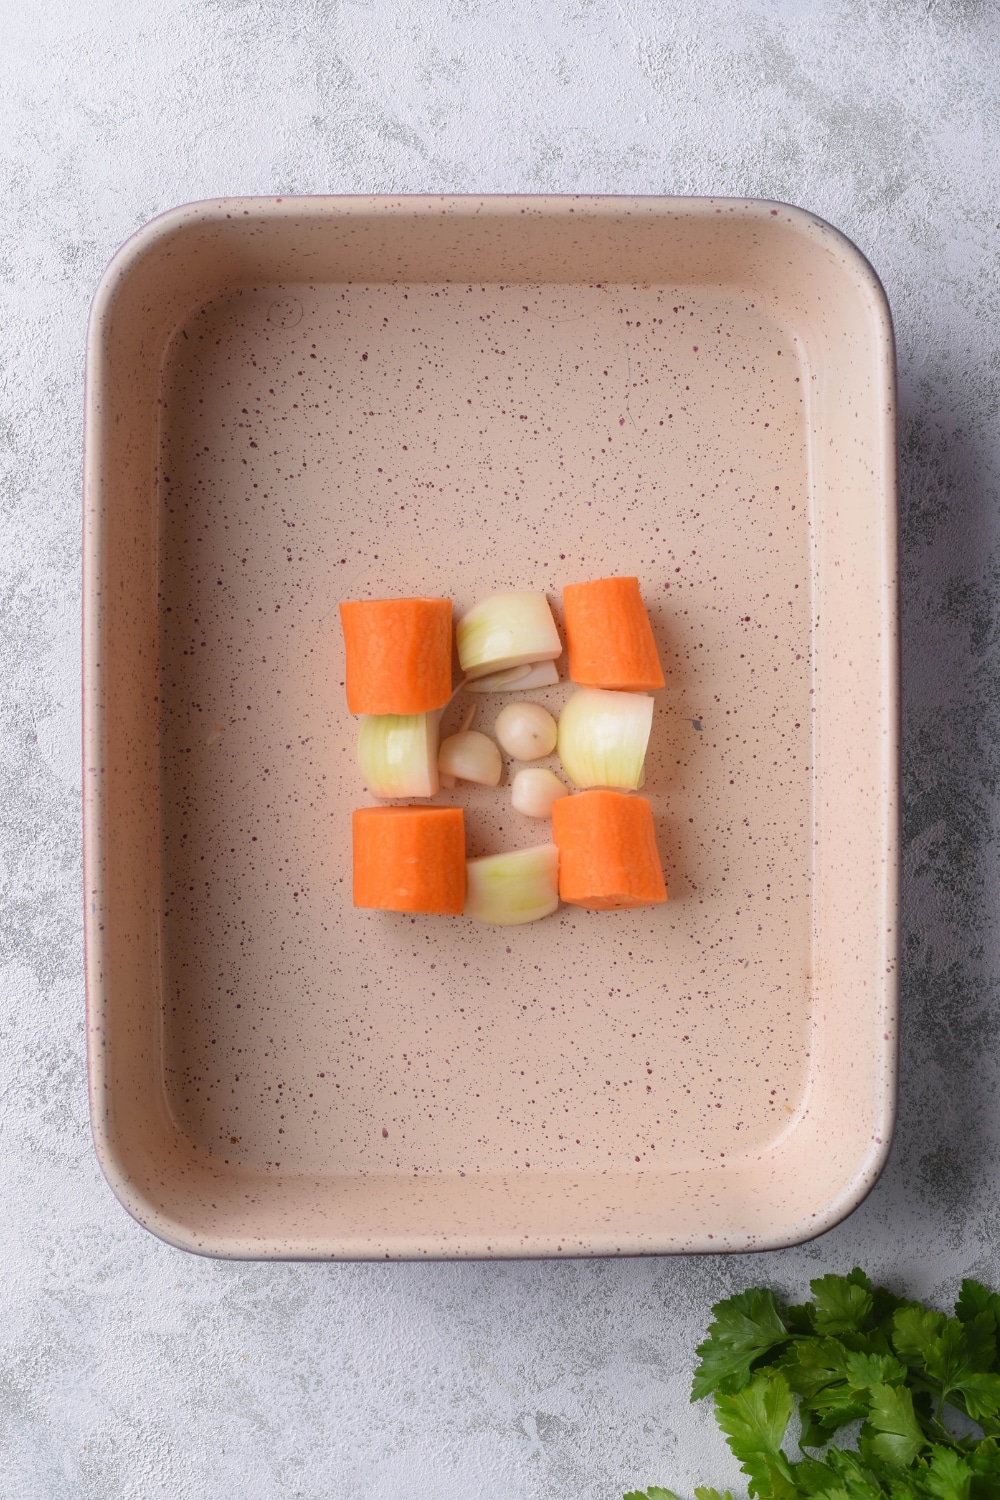 Chunks of carrots, onions, and garlic arranged in a small square in the center of a ceramic baking tray.